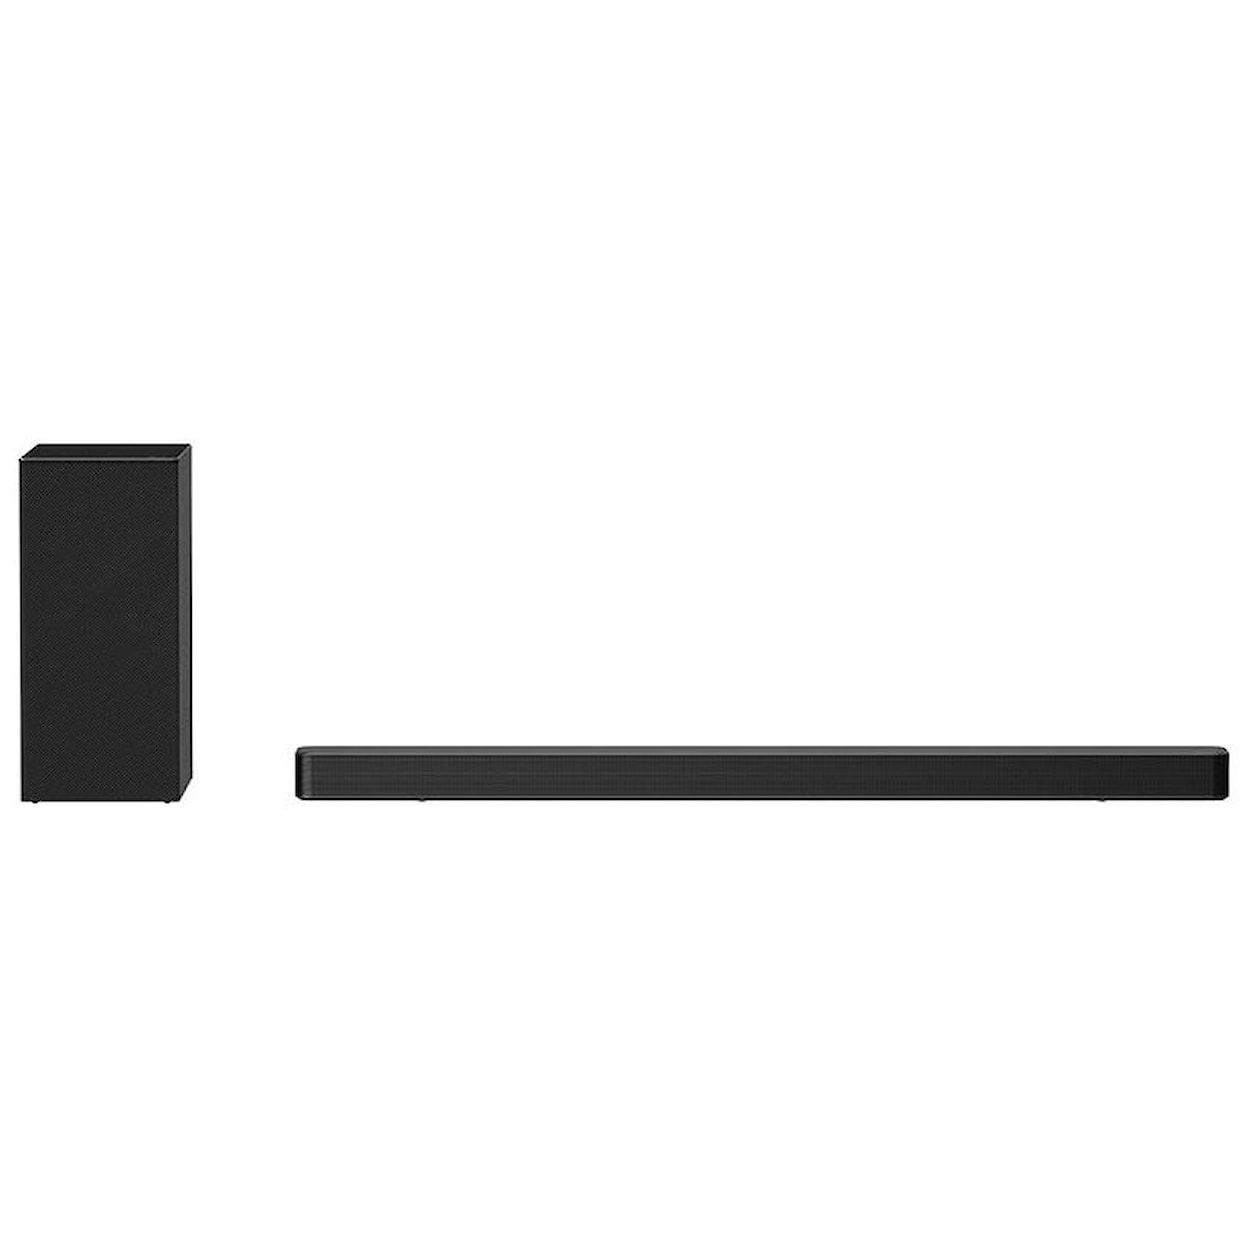 LG Electronics Home Theater 3.1 Channel Sound Bar